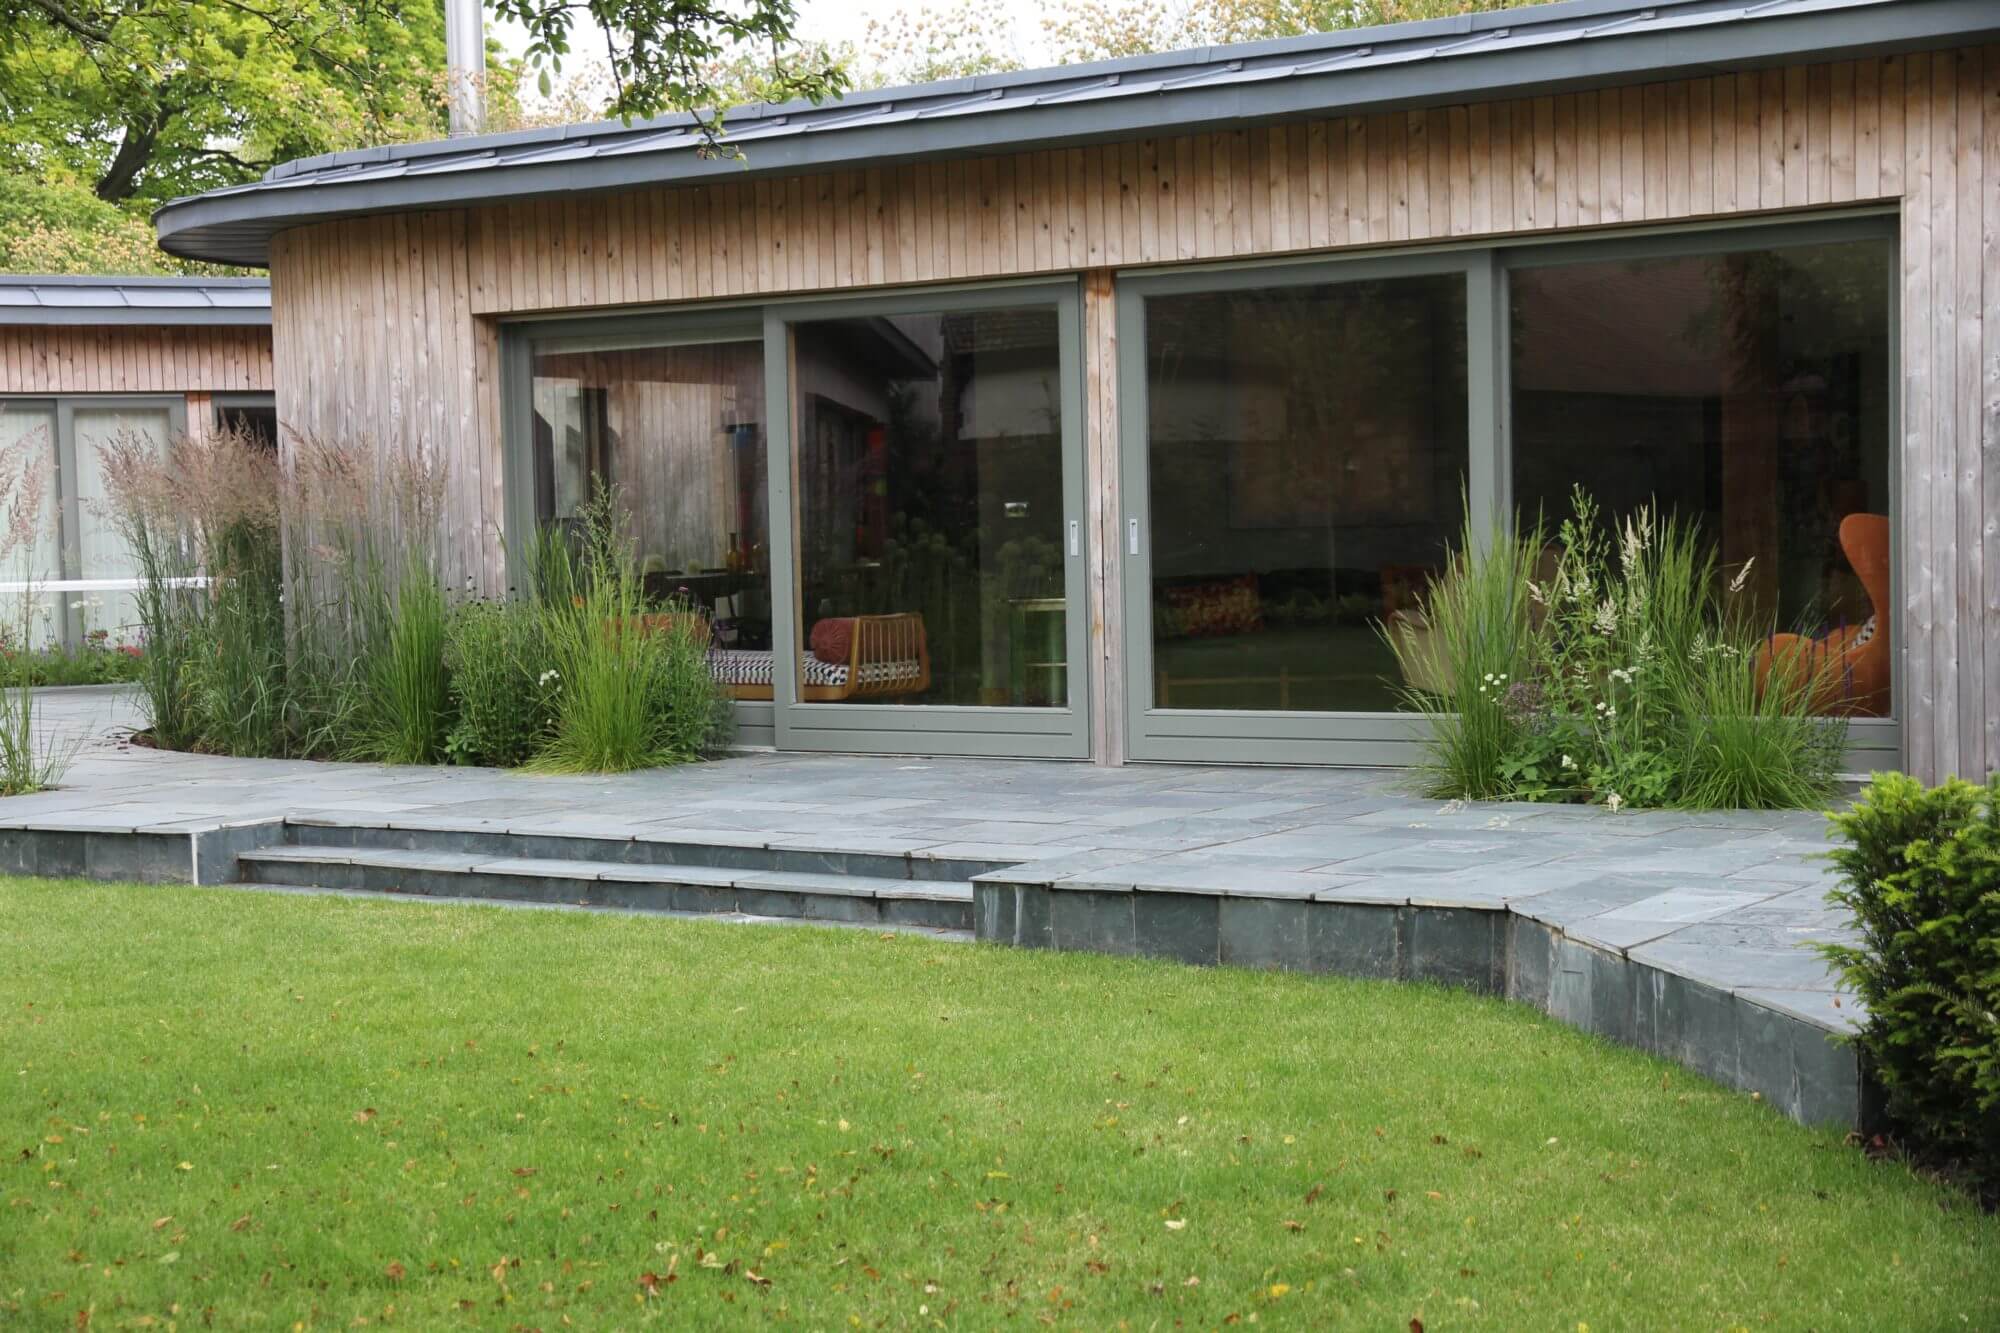 Garden studio with grey wooden decking and green lawn